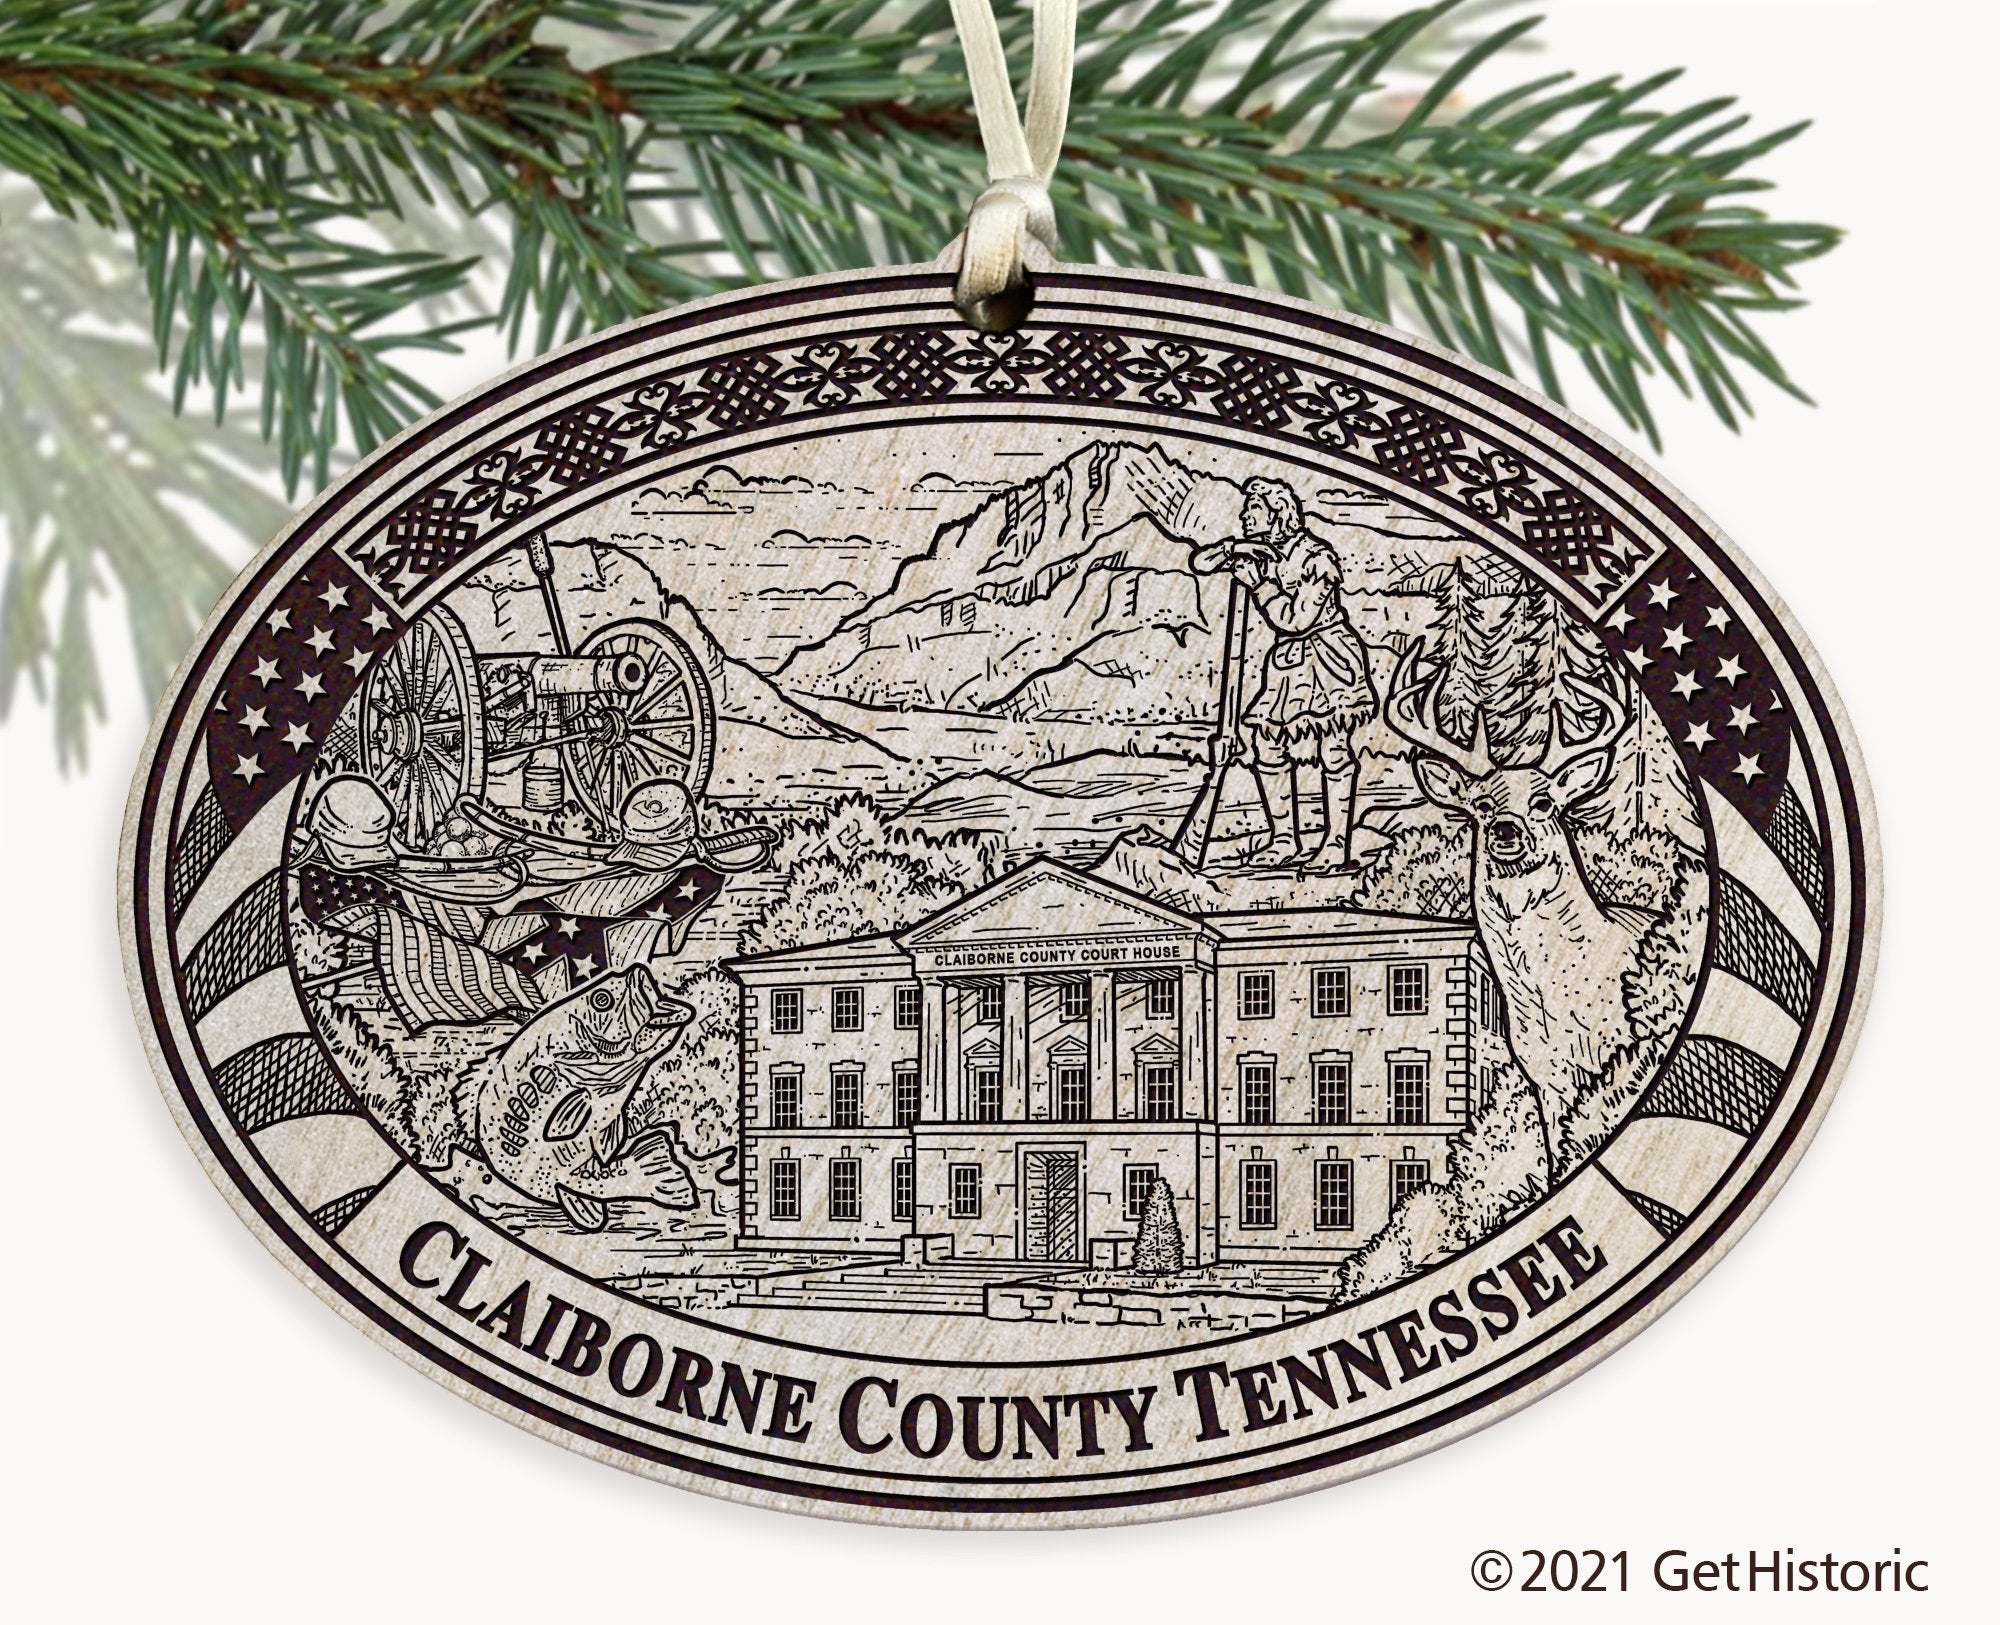 Claiborne County Tennessee Engraved Ornament